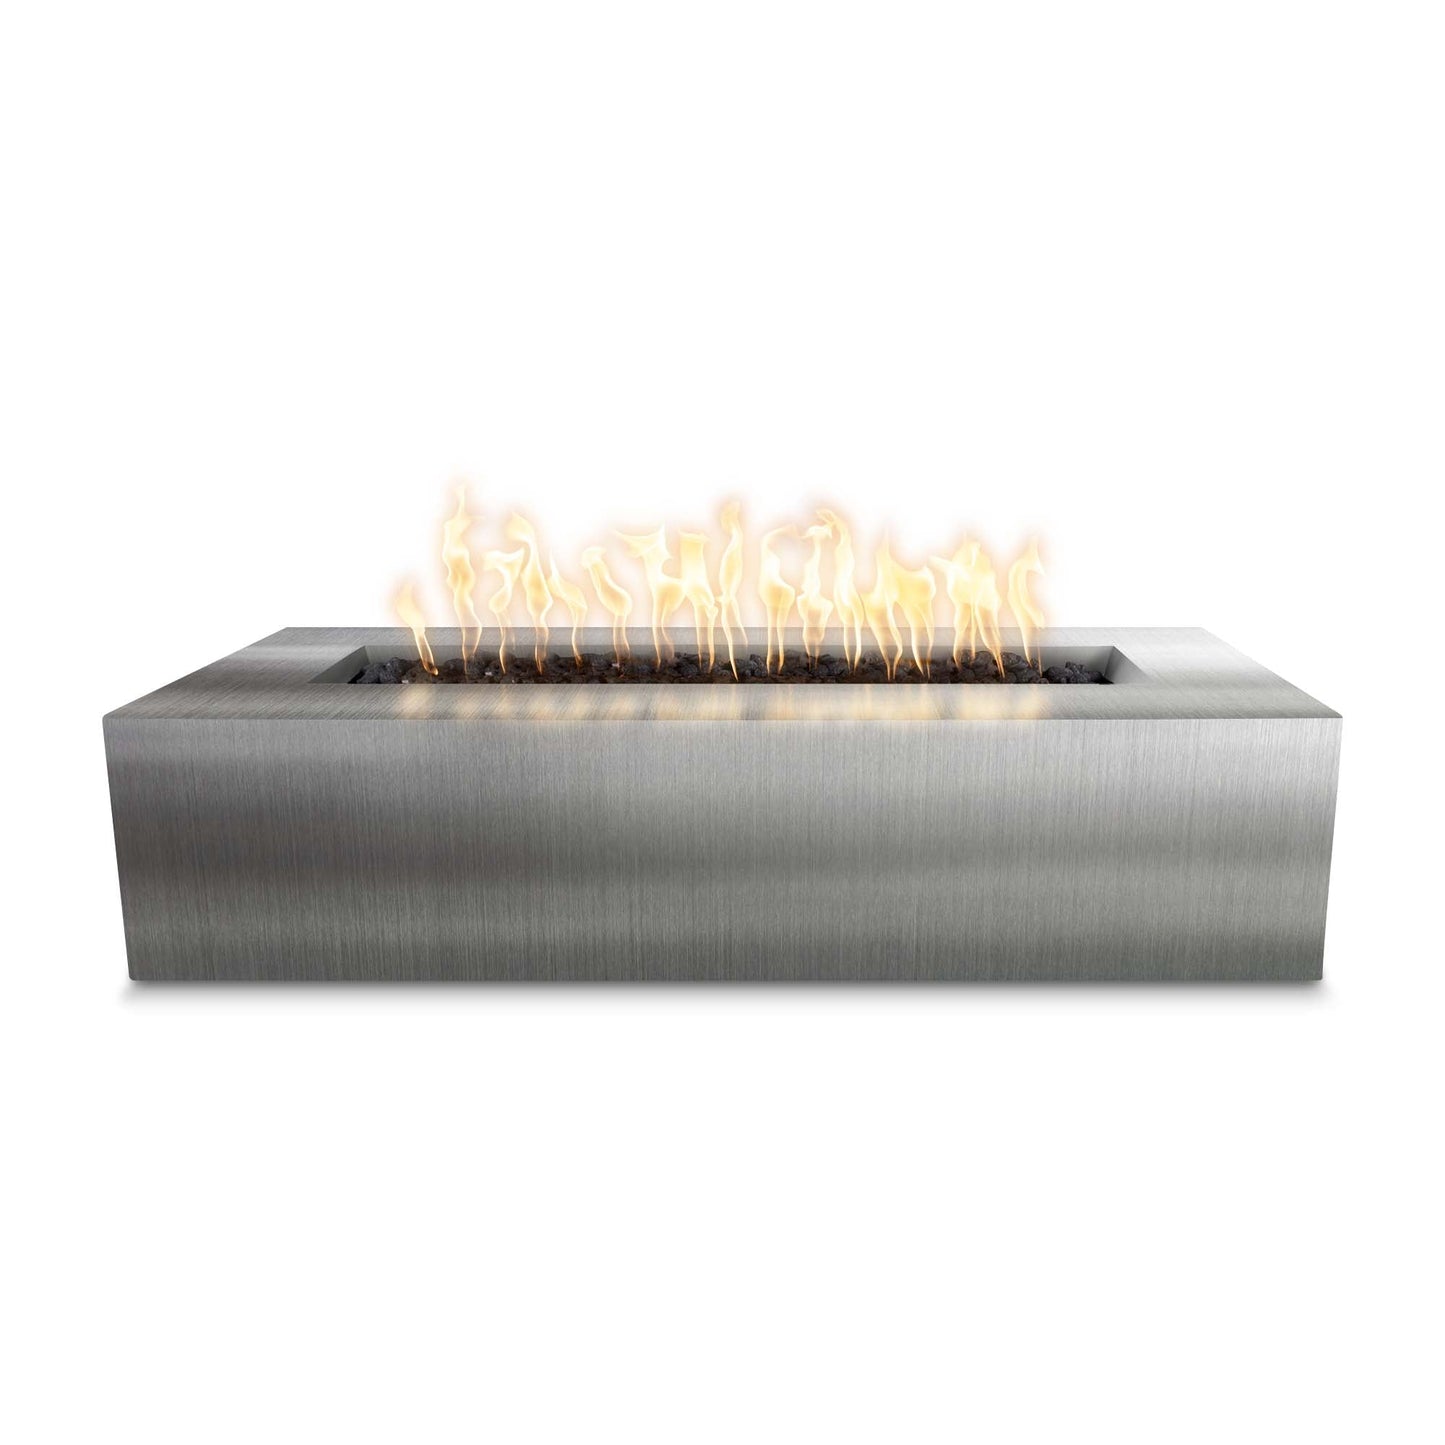 The Outdoor Plus Rectangular Regal 54" Corten Steel Natural Gas Fire Pit with Match Lit Ignition